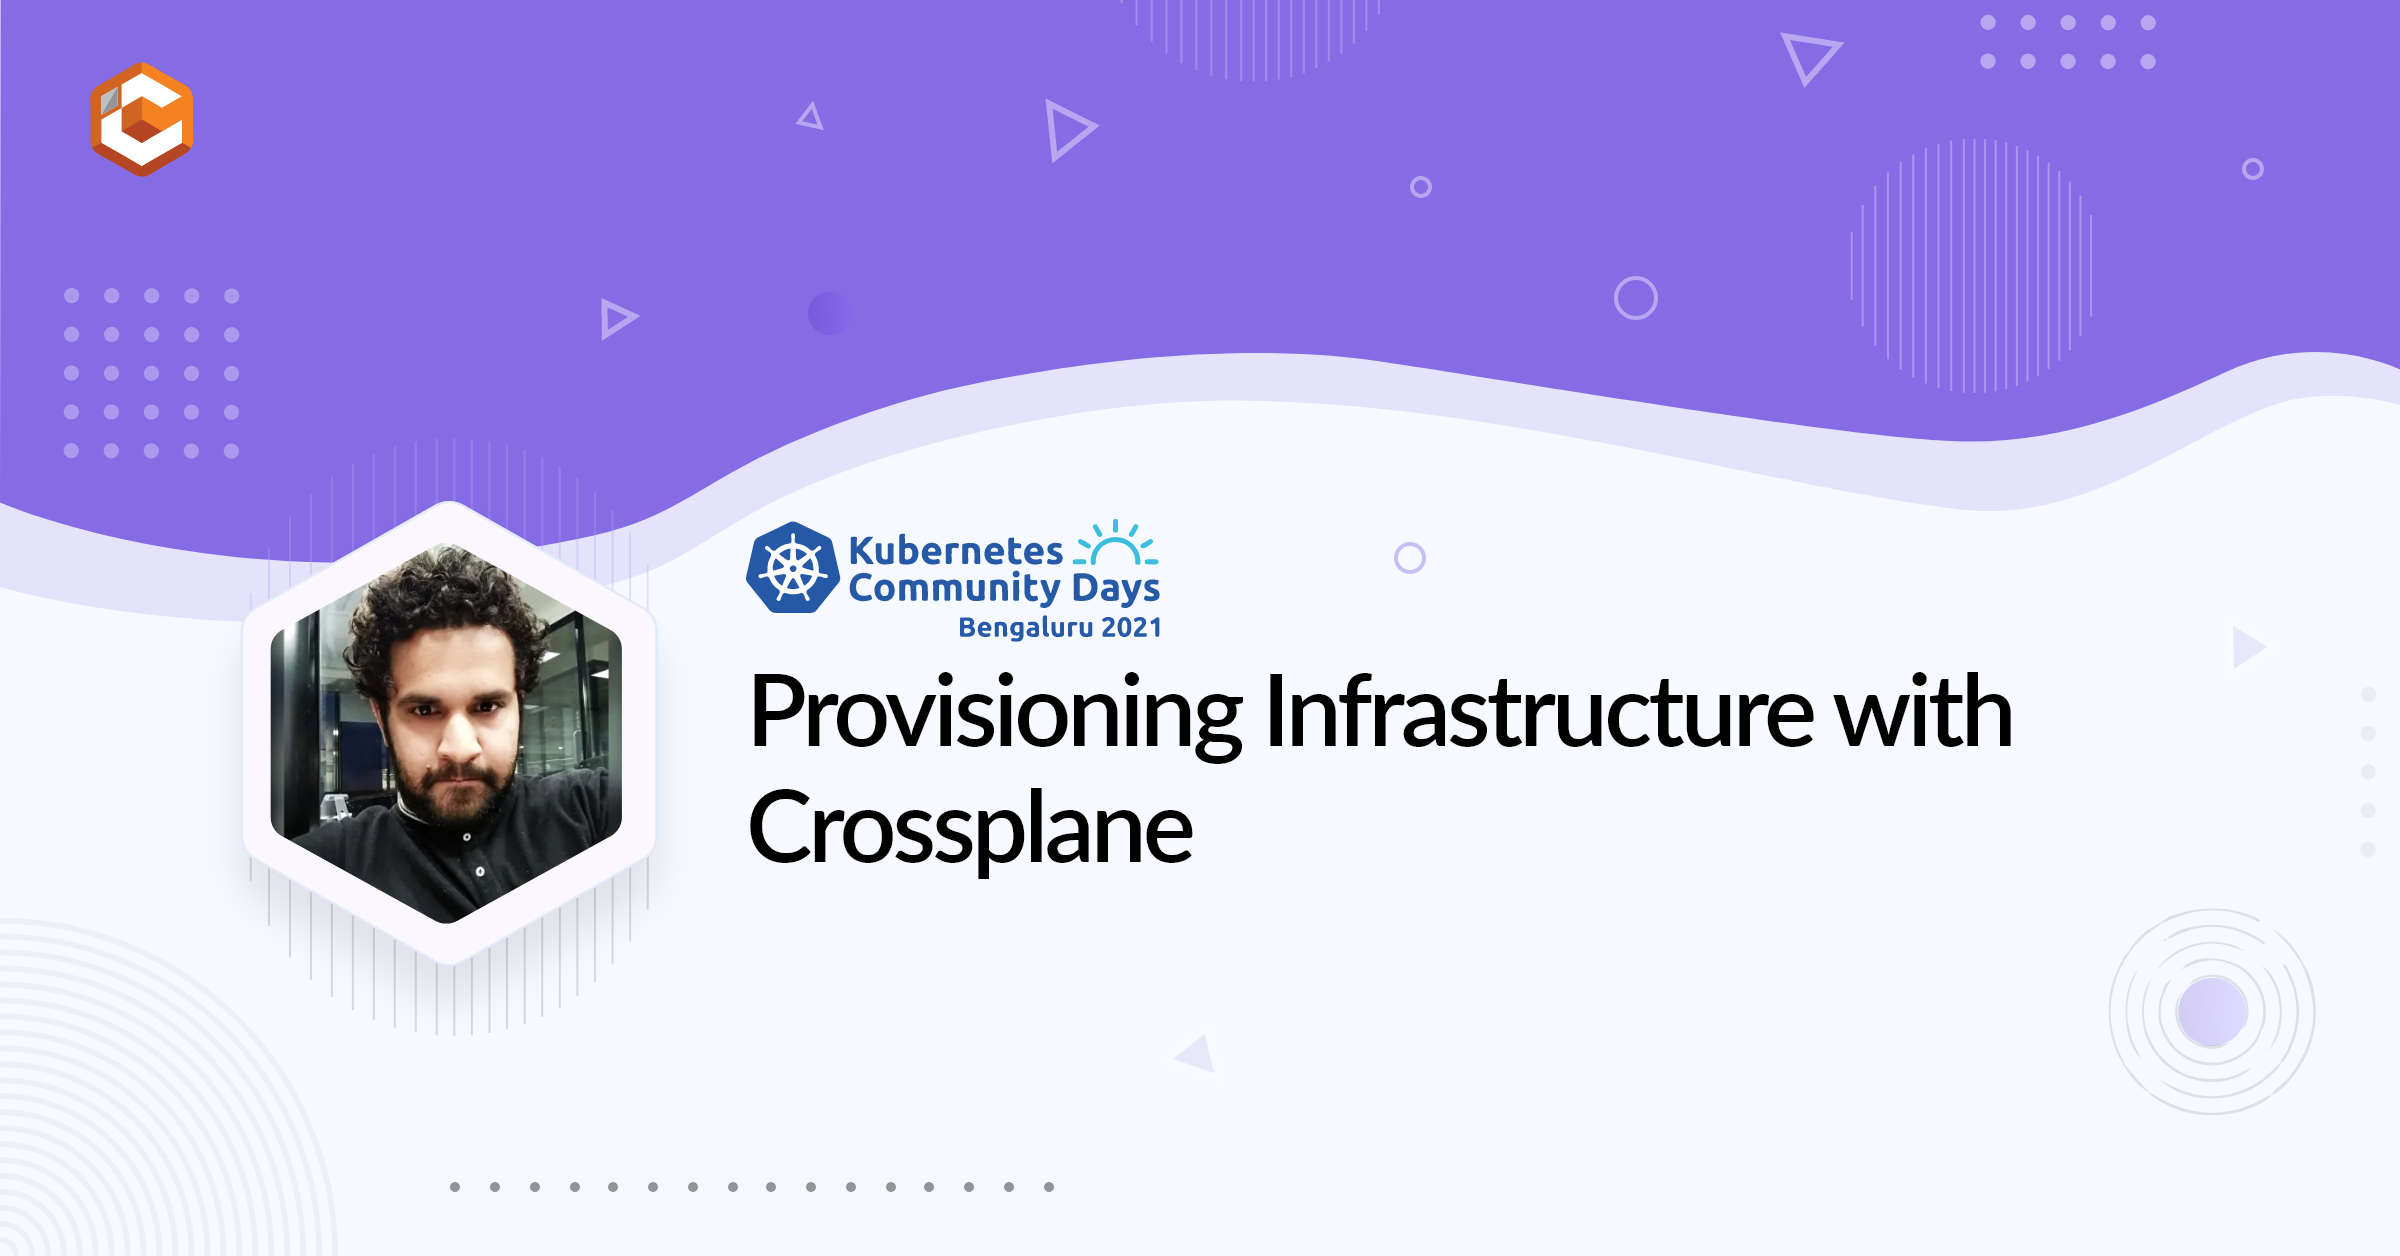 Provisioning Infrastructure with Crossplane